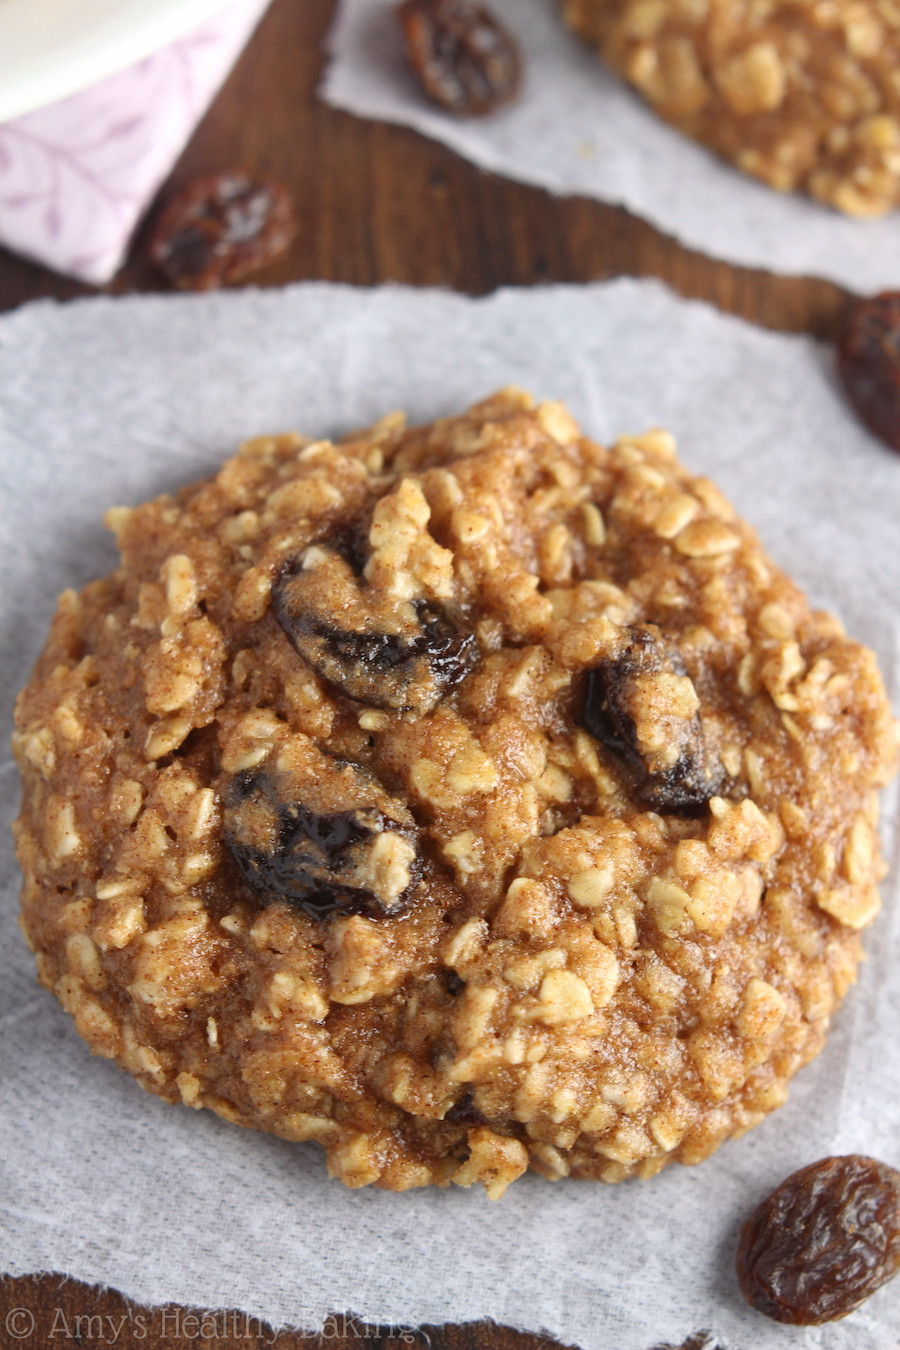 Oatmeal Cookies Recipe Healthy
 The Ultimate Healthy Soft & Chewy Oatmeal Raisin Cookies